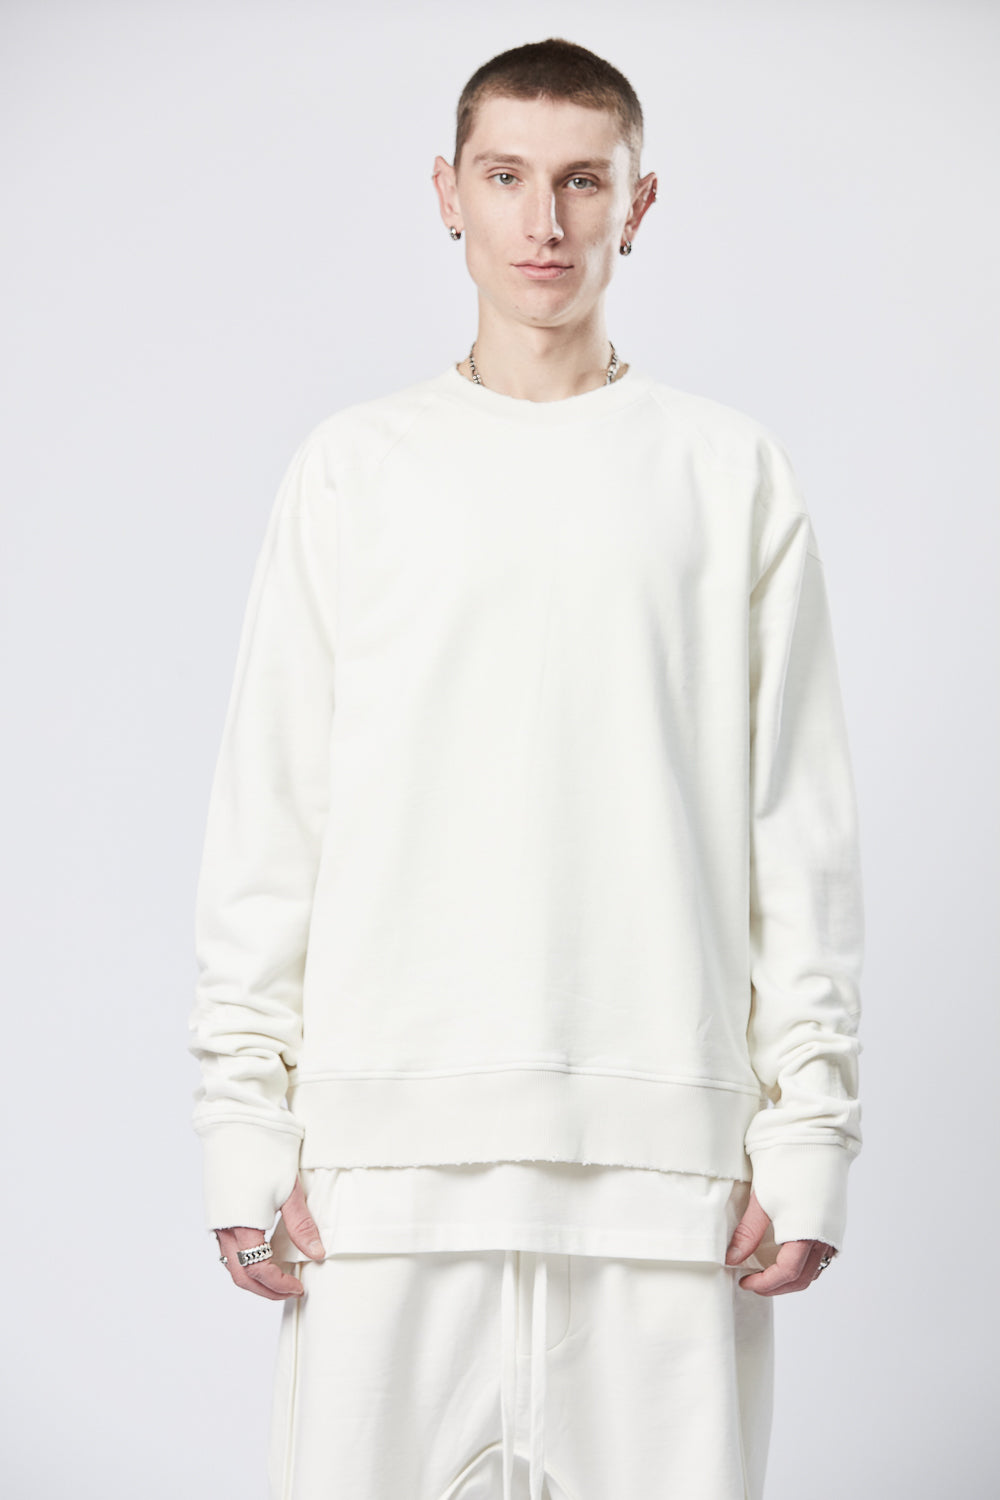 Buy the Thom Krom M S 170 Sweatshirt in Cream at Intro. Spend £50 for free UK delivery. Official stockists. We ship worldwide.